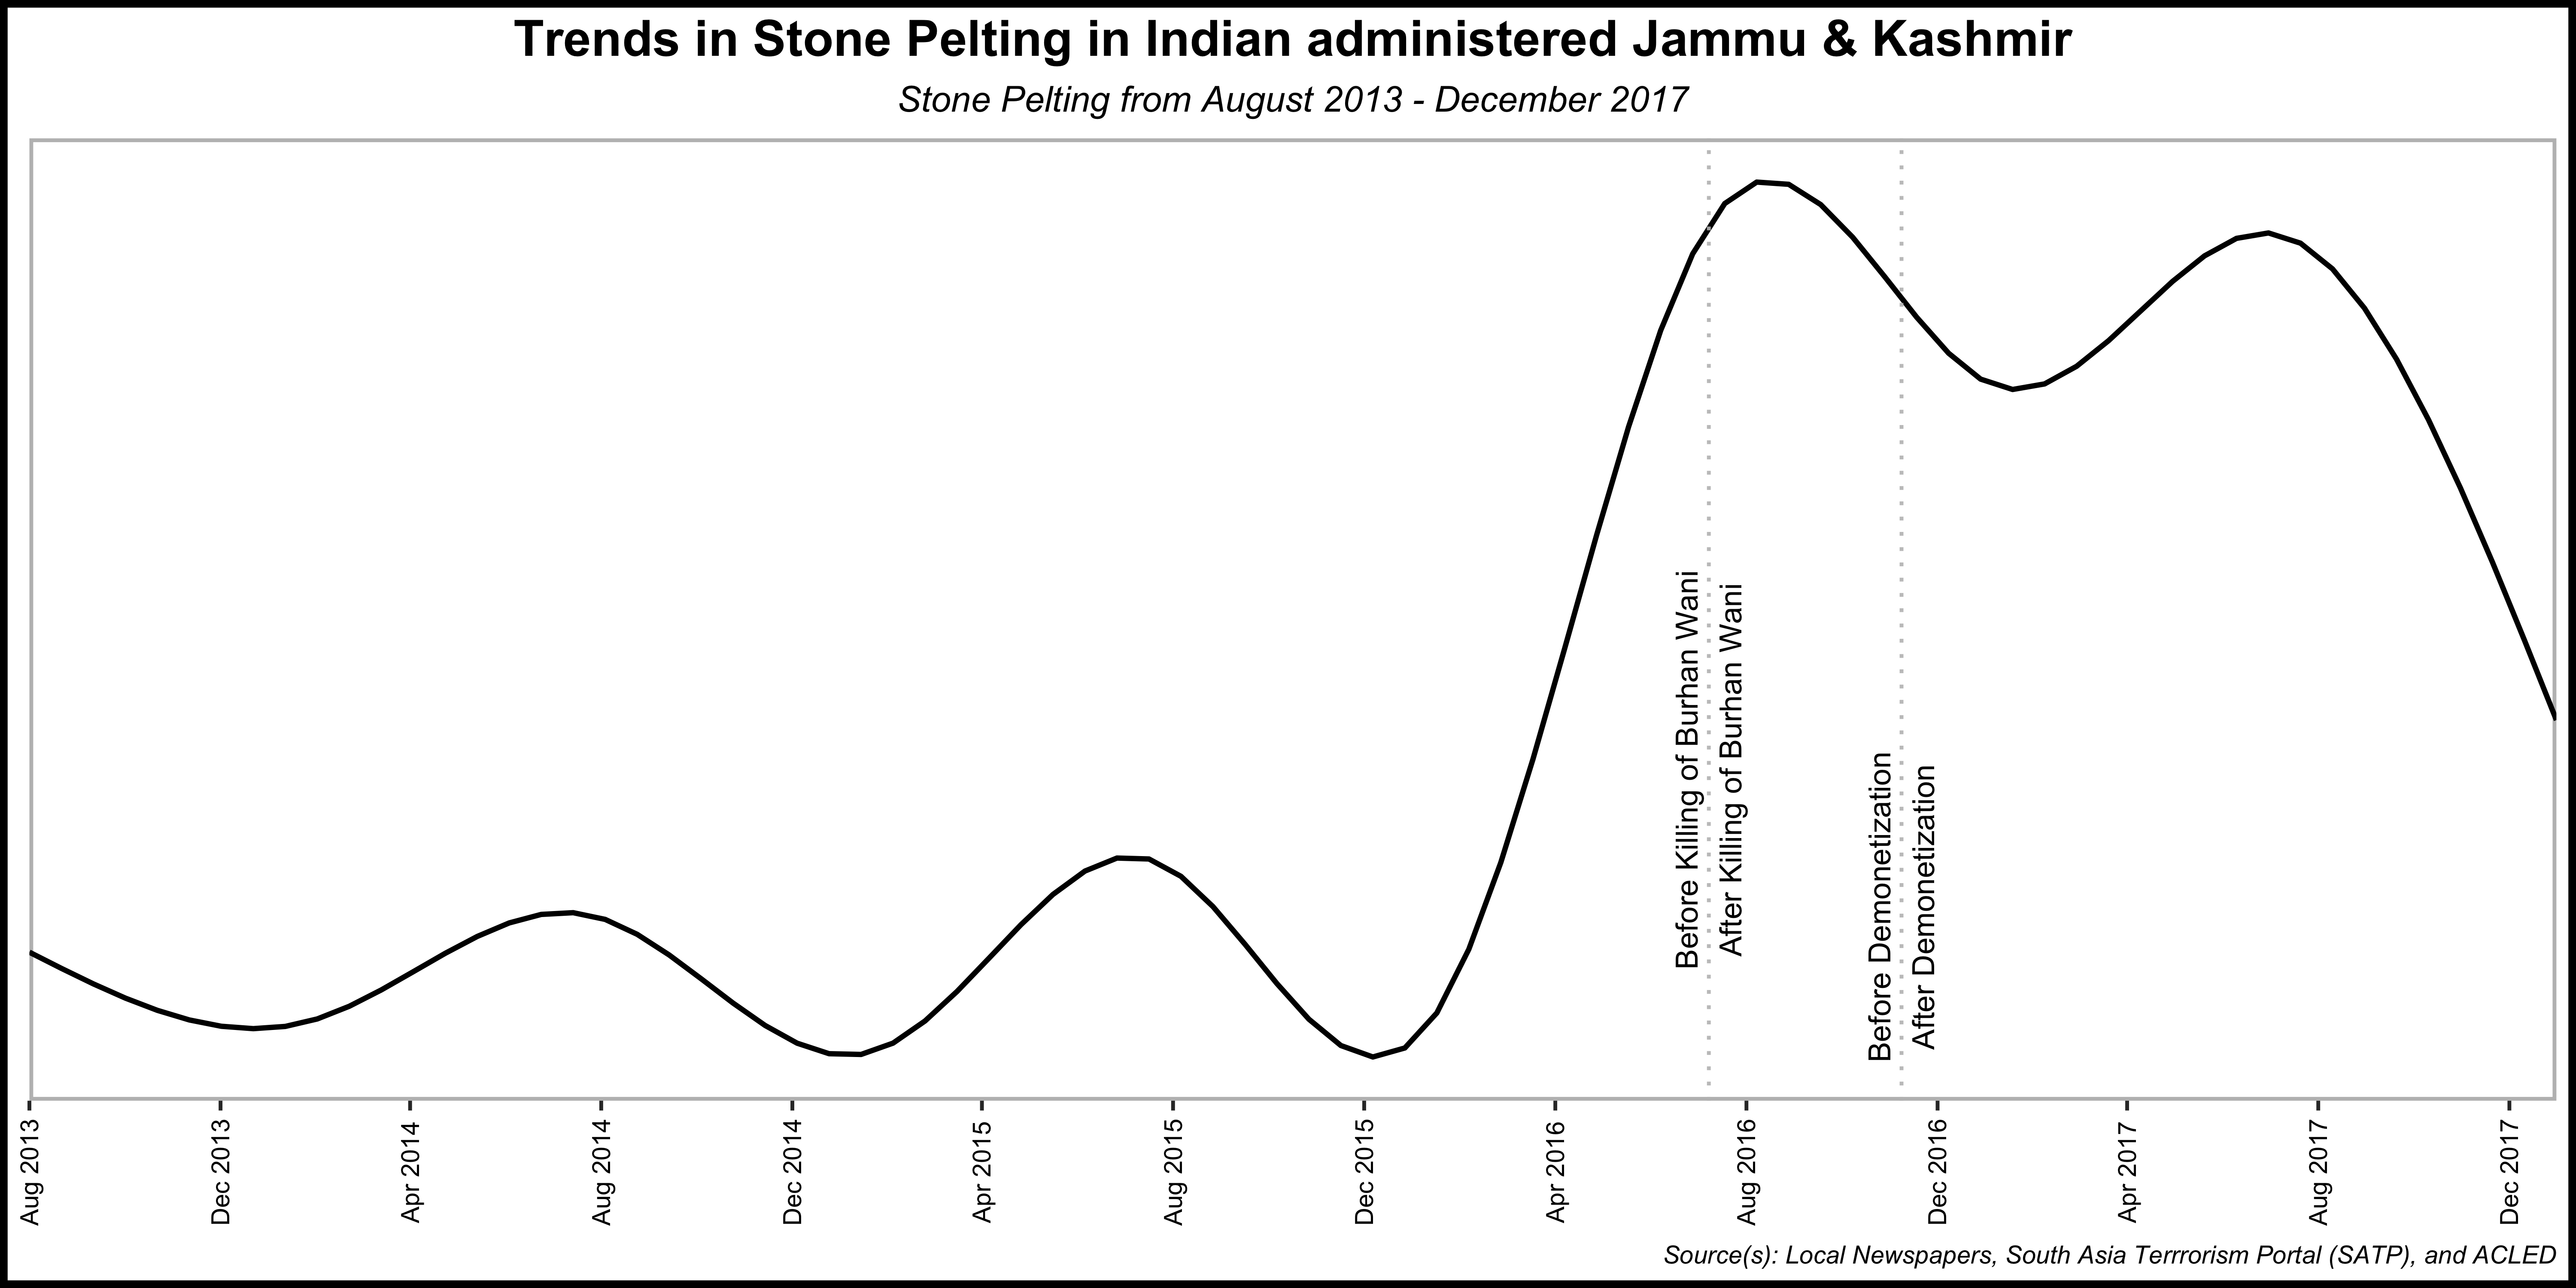 Figure 1: Trends in Stone-pelting Source: In-house tabulation of data